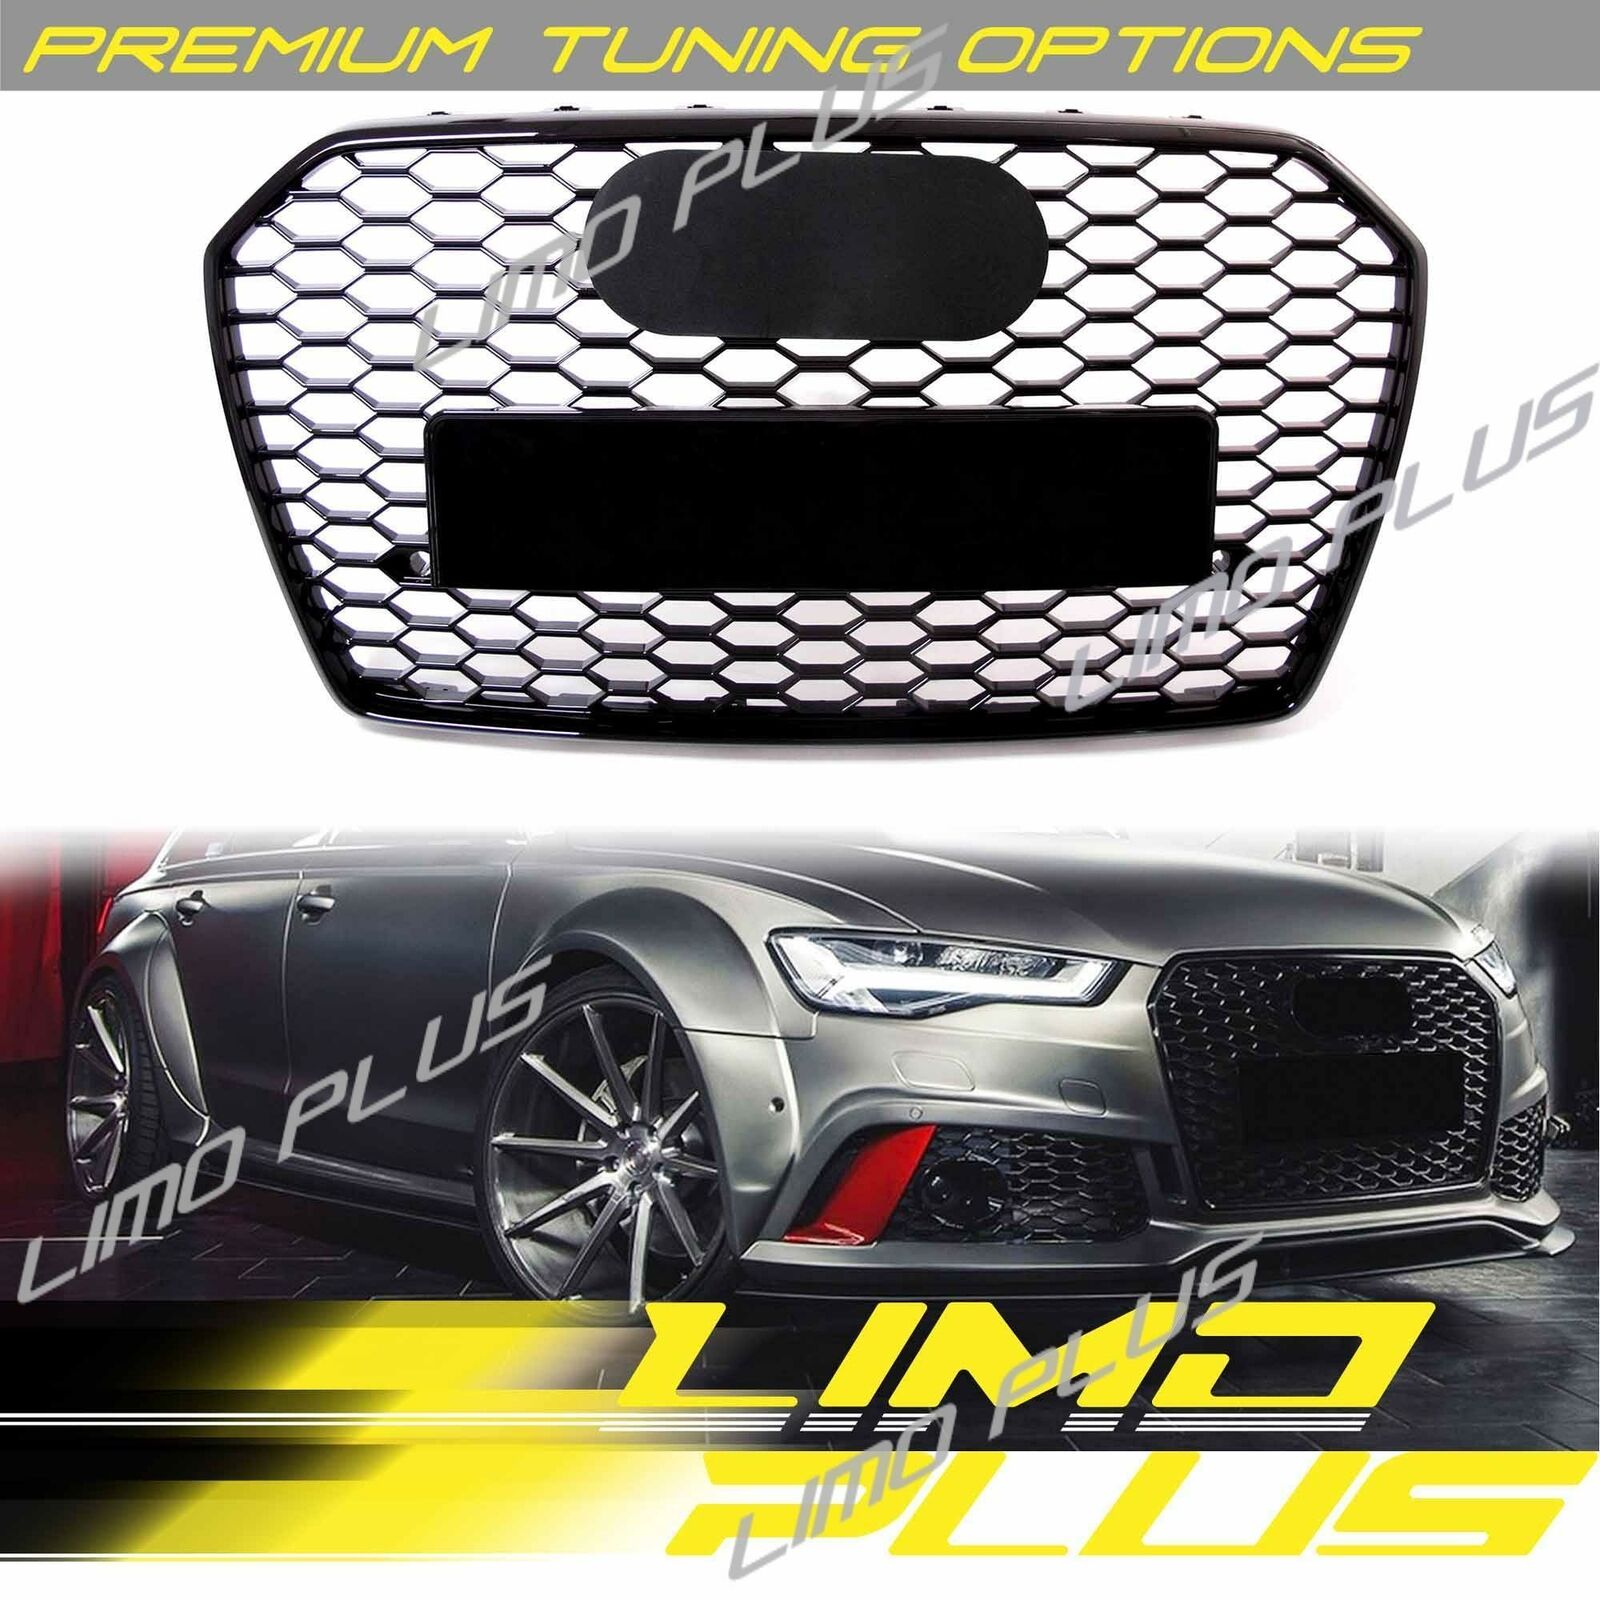 RS6 Style Honeycomb Grill Front Grille Glossy Black For Audi A6 C7 S6 16-18